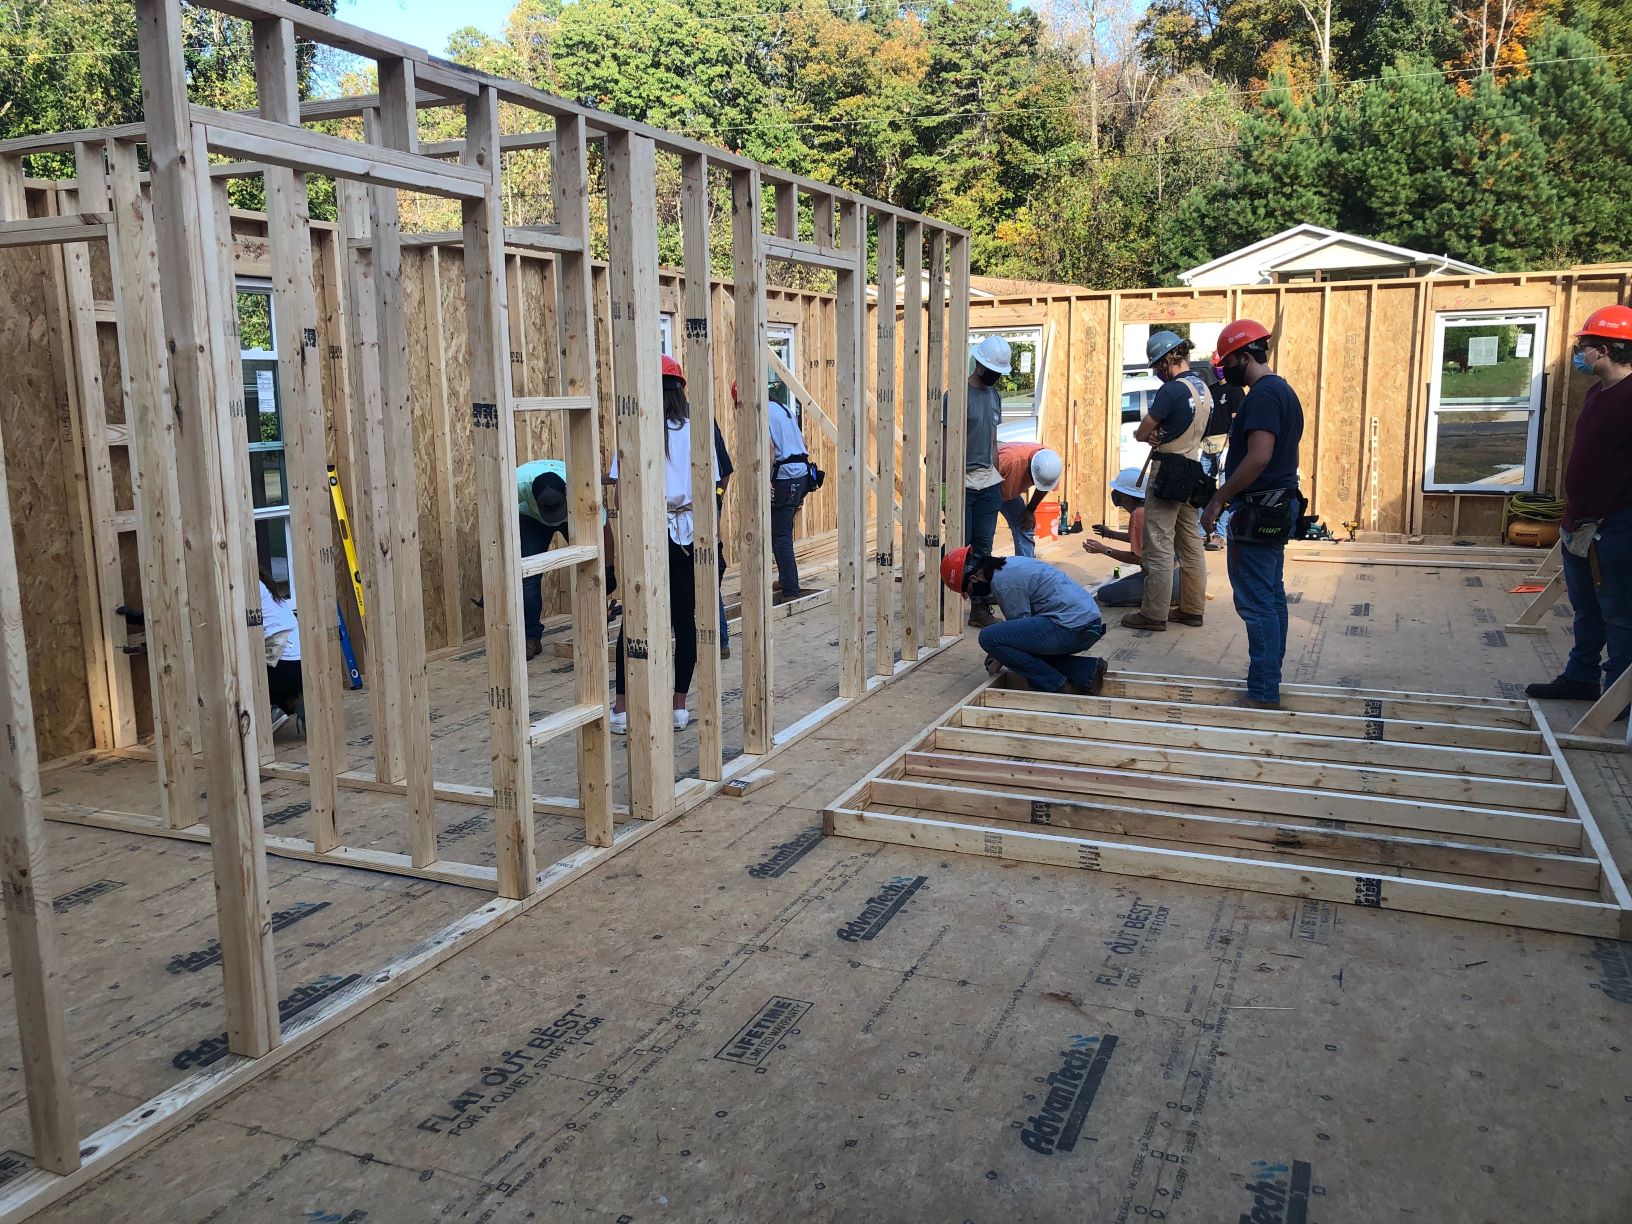 Load Star Trusses Donated to Clemson Homecoming Habitat Build Project